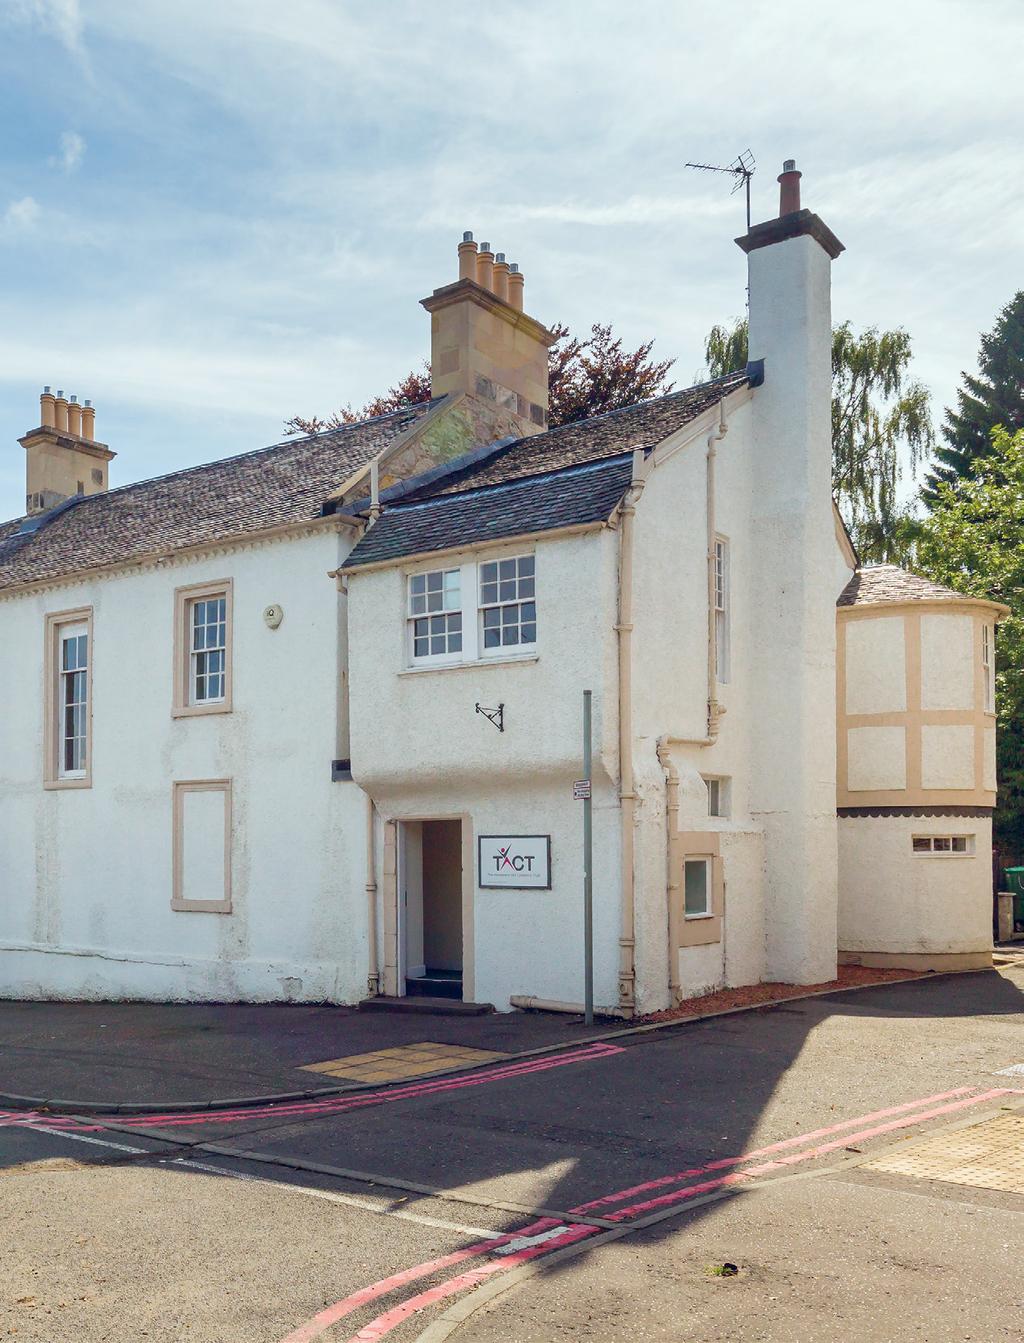 Slateford House 51-53 Lanark Road, Edinburgh 6 RATEABLE VALUE The subject property is presently entered into the Valuation Roll as an Office property with a RV of 38,800.